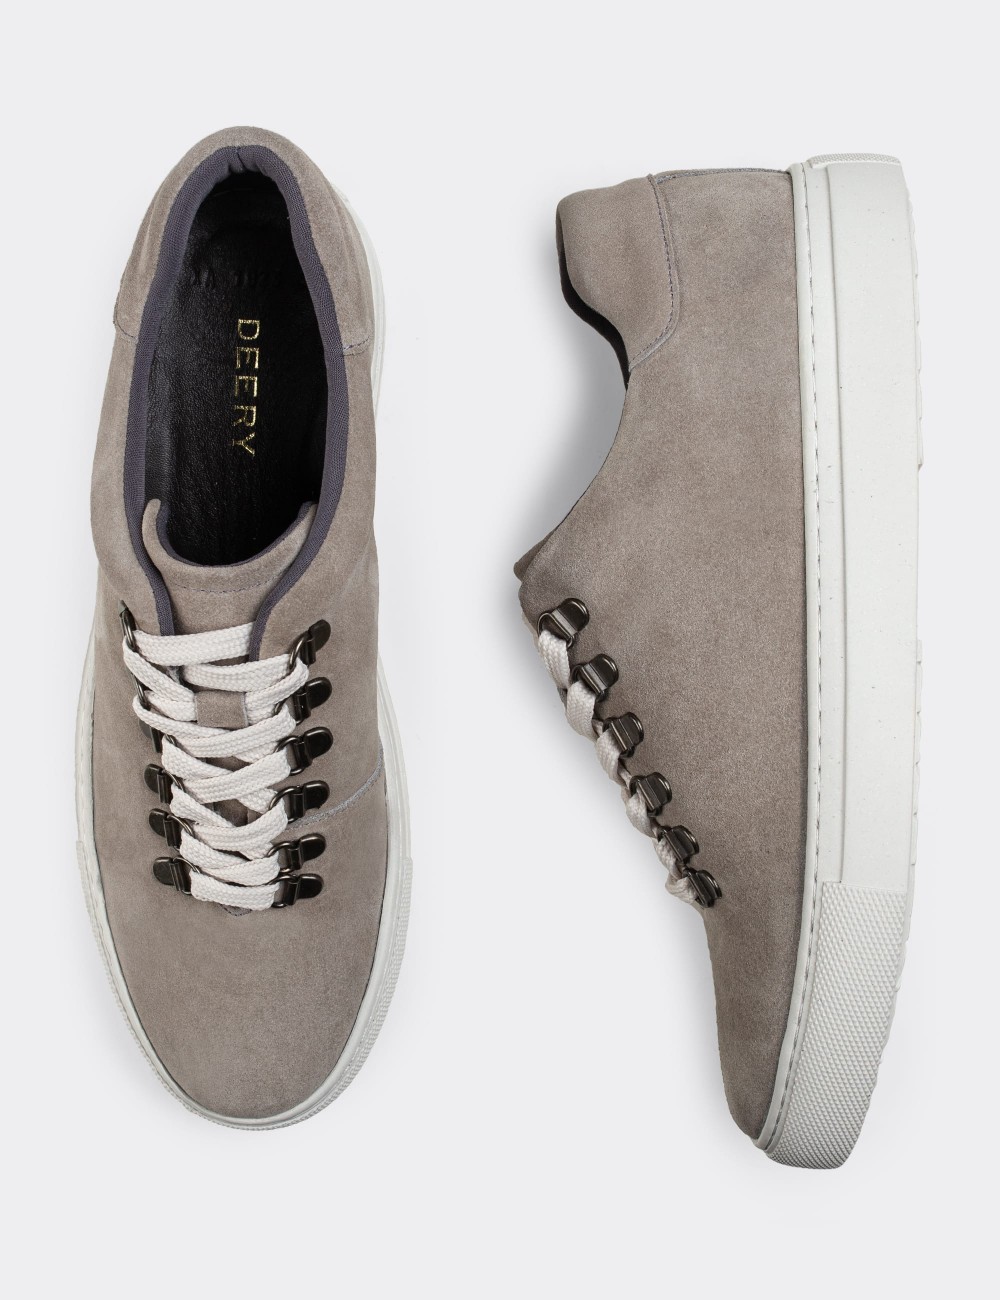 Beige Suede Leather  Sneakers - 01835MBEJC01